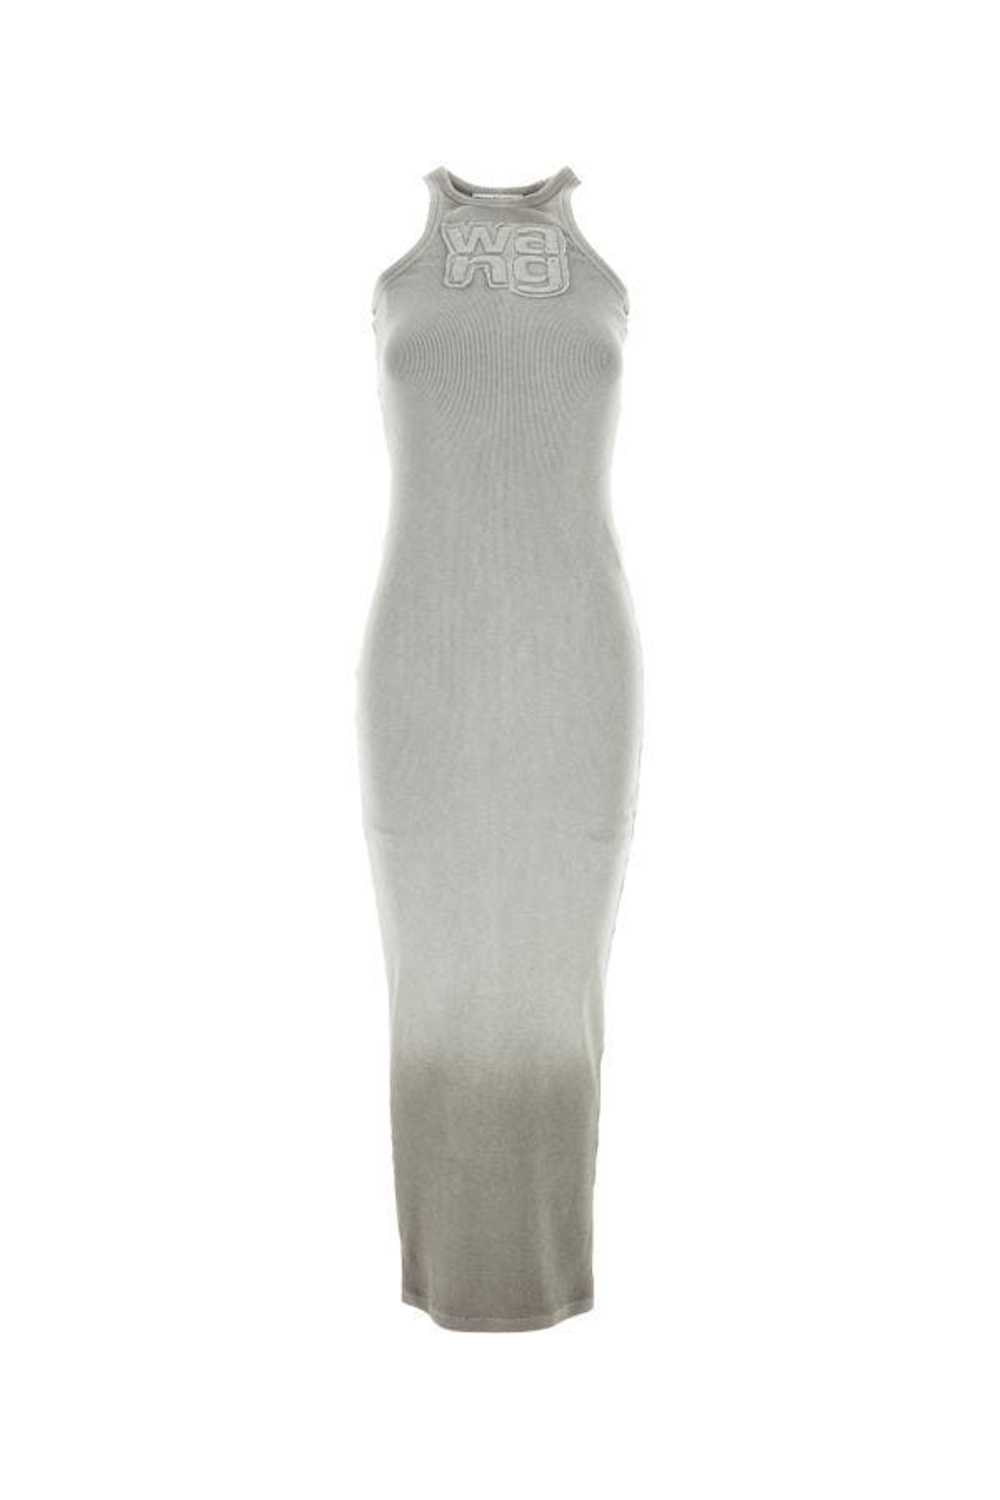 T by Alexander Wang Grey Stretch Cotton Dress - image 3